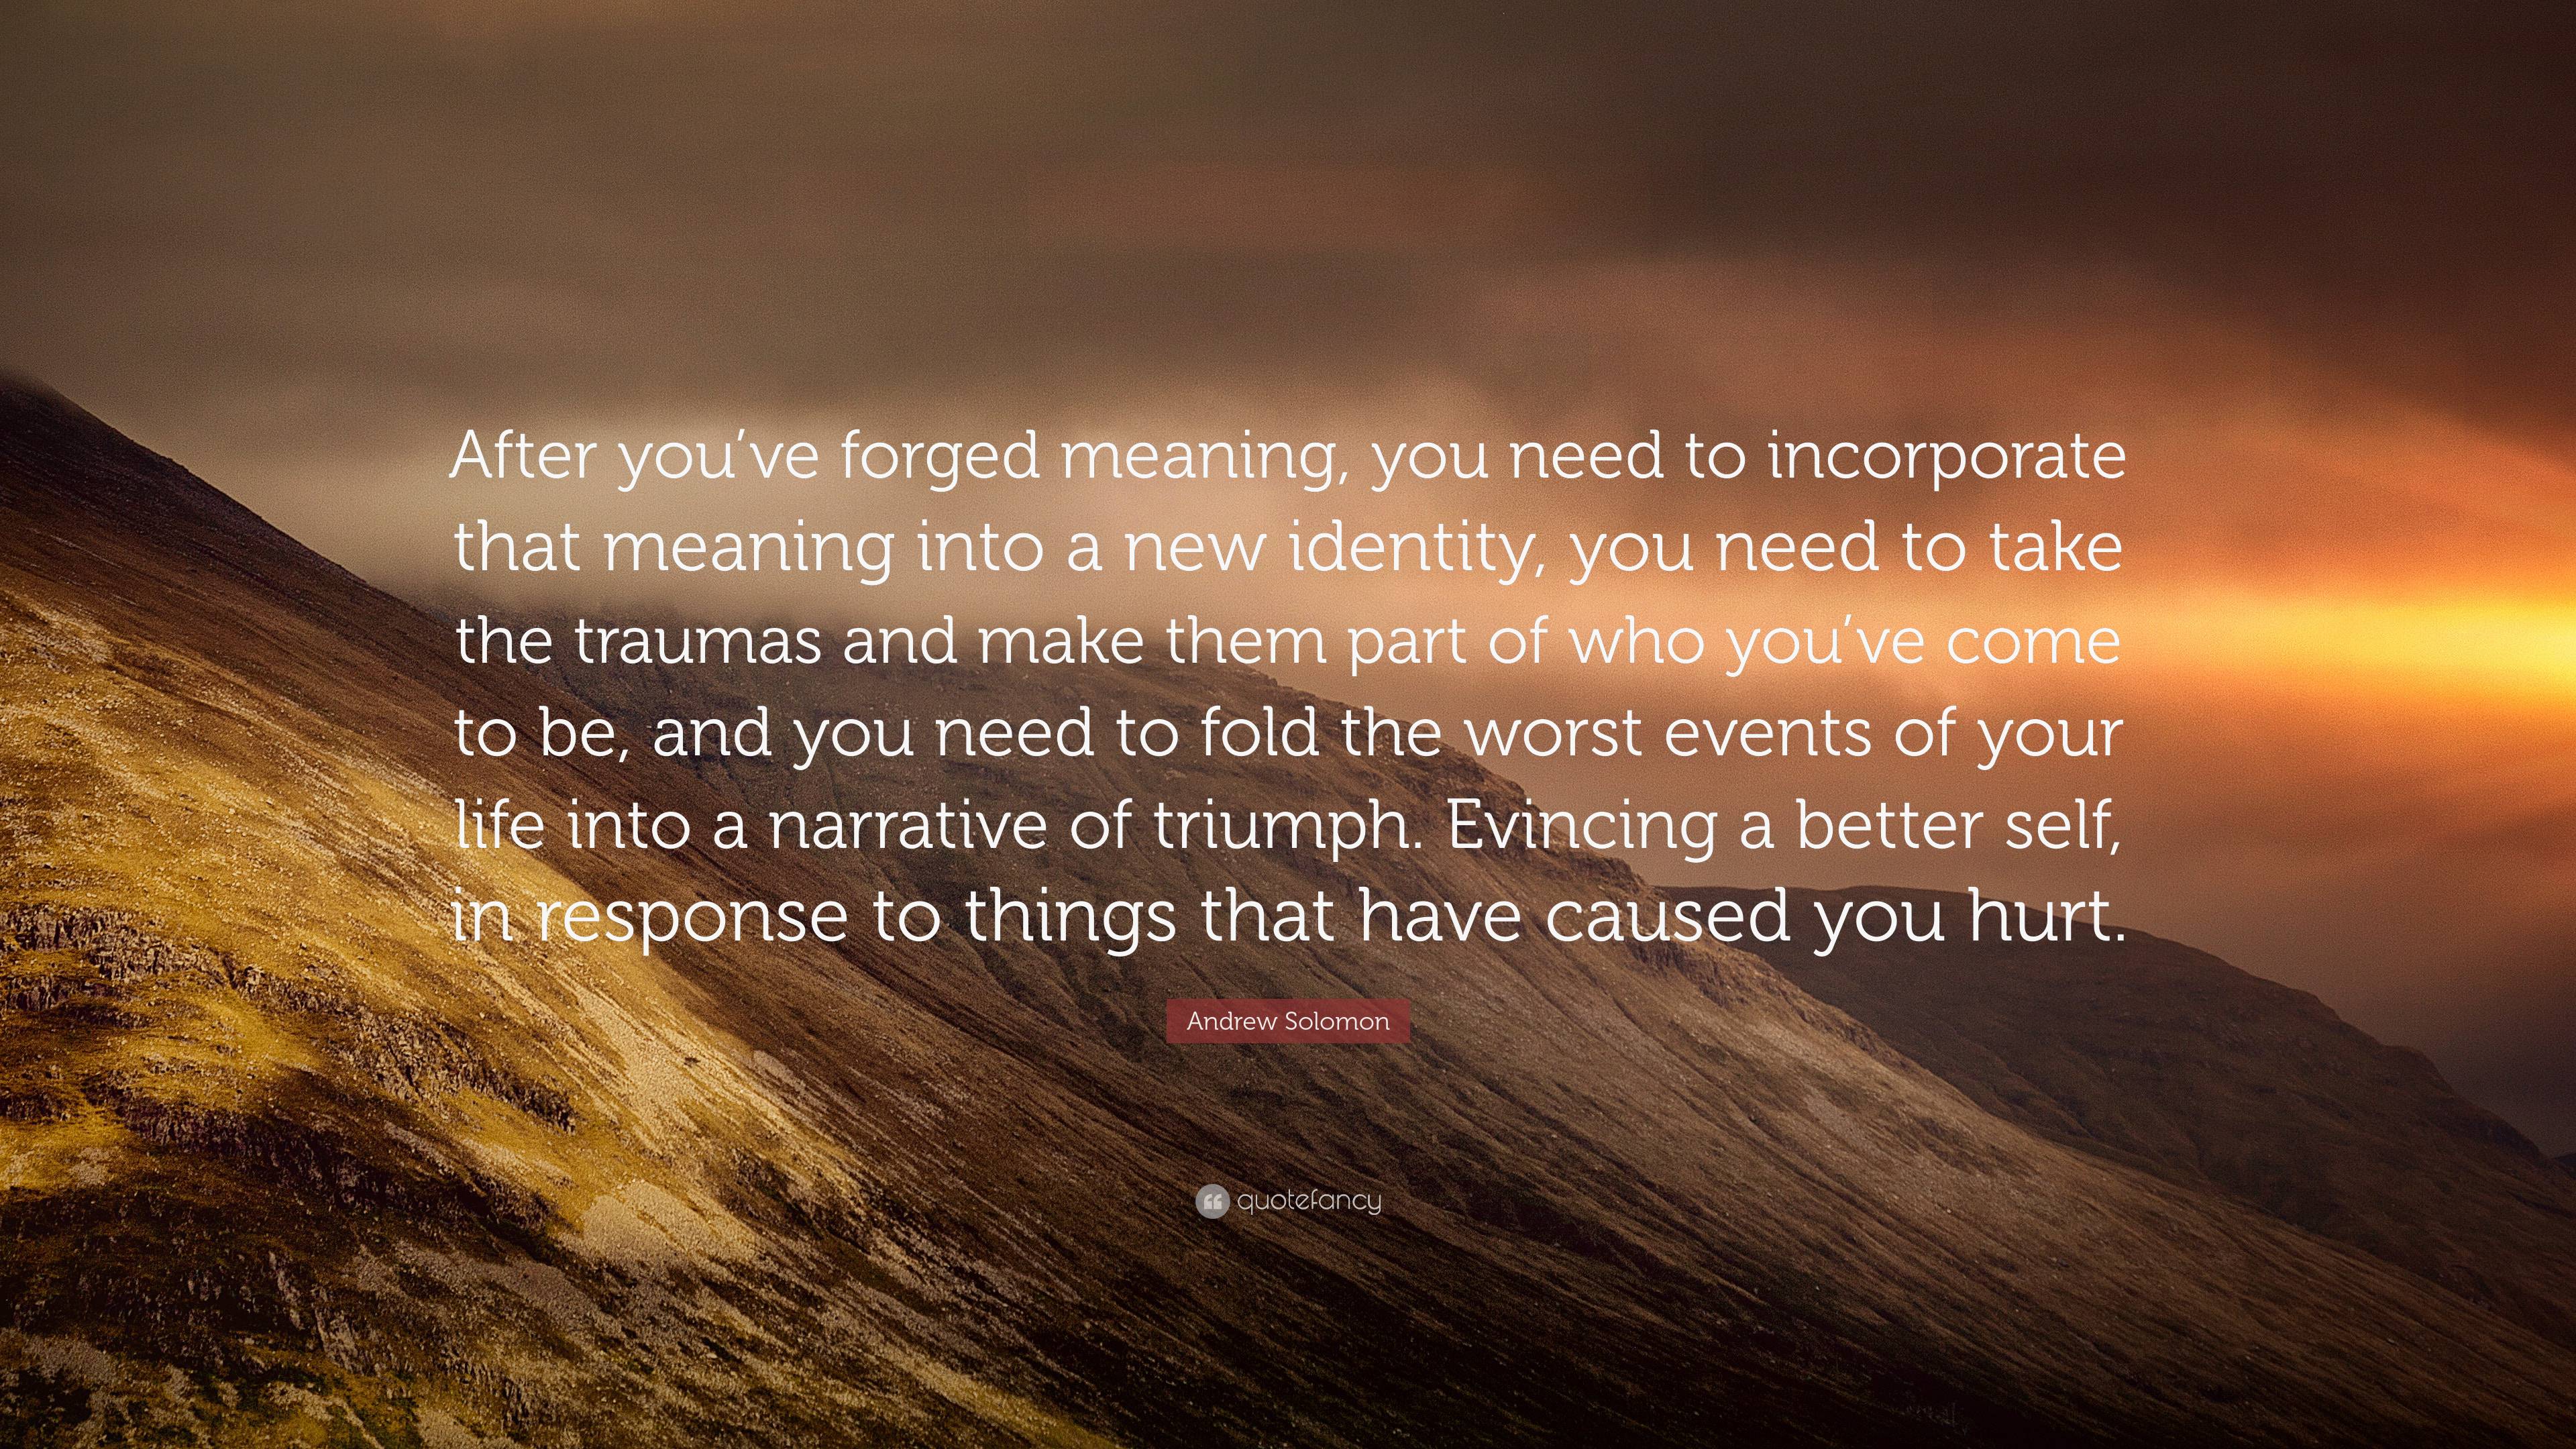 Andrew Solomon Quote: “After you’ve forged meaning, you need to ...